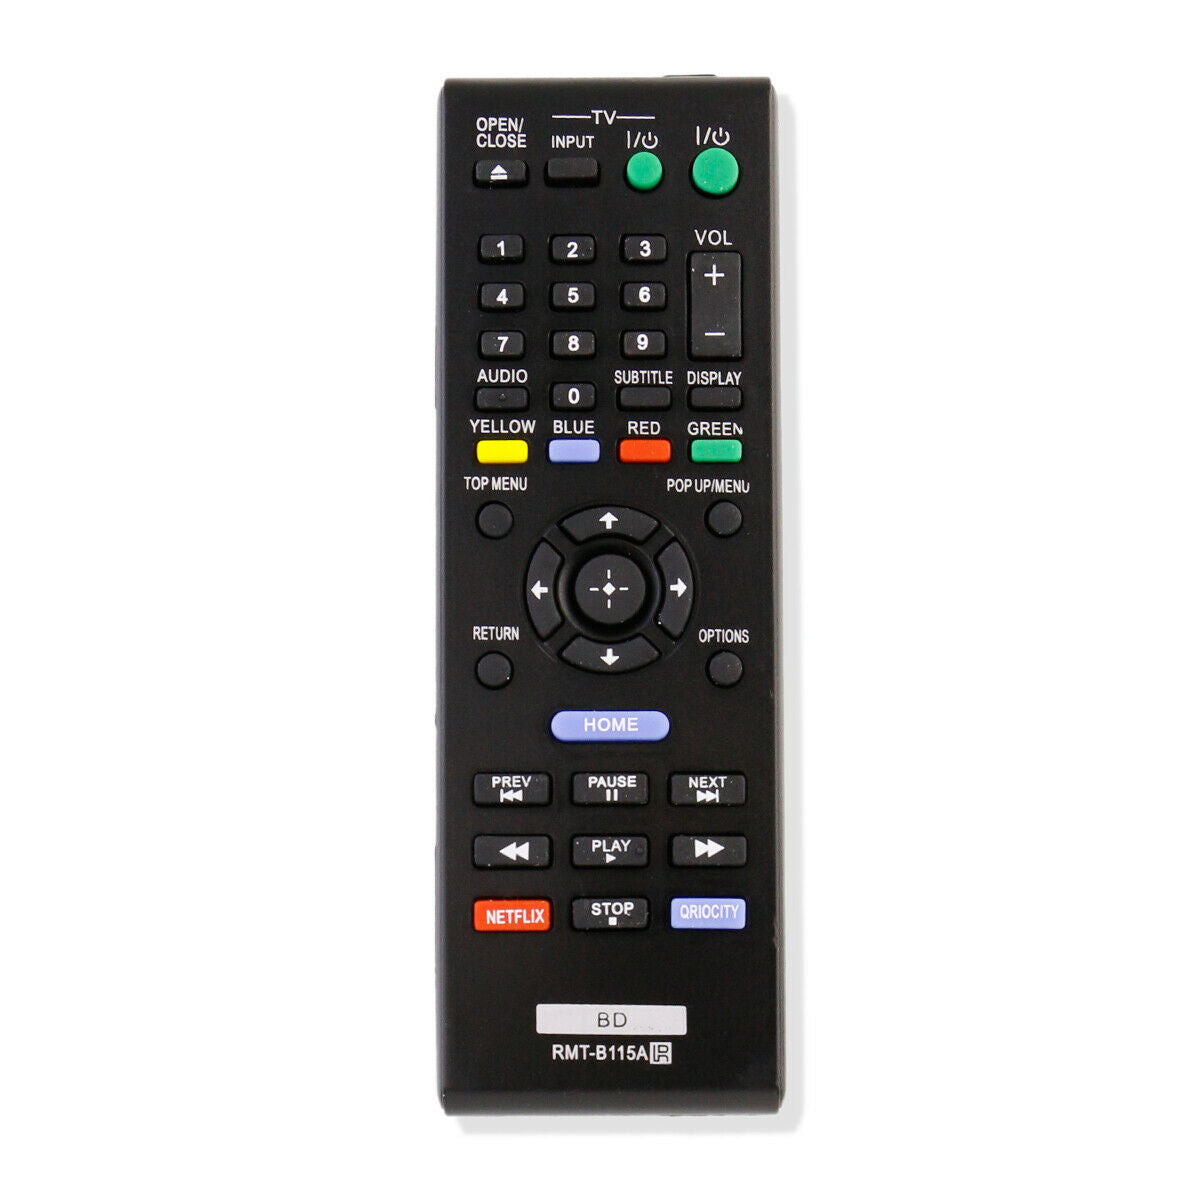 RMT-B115A Replacement Remote Control for Sony BDP-S480 BDP-S580 BDP-S483 DVD Player